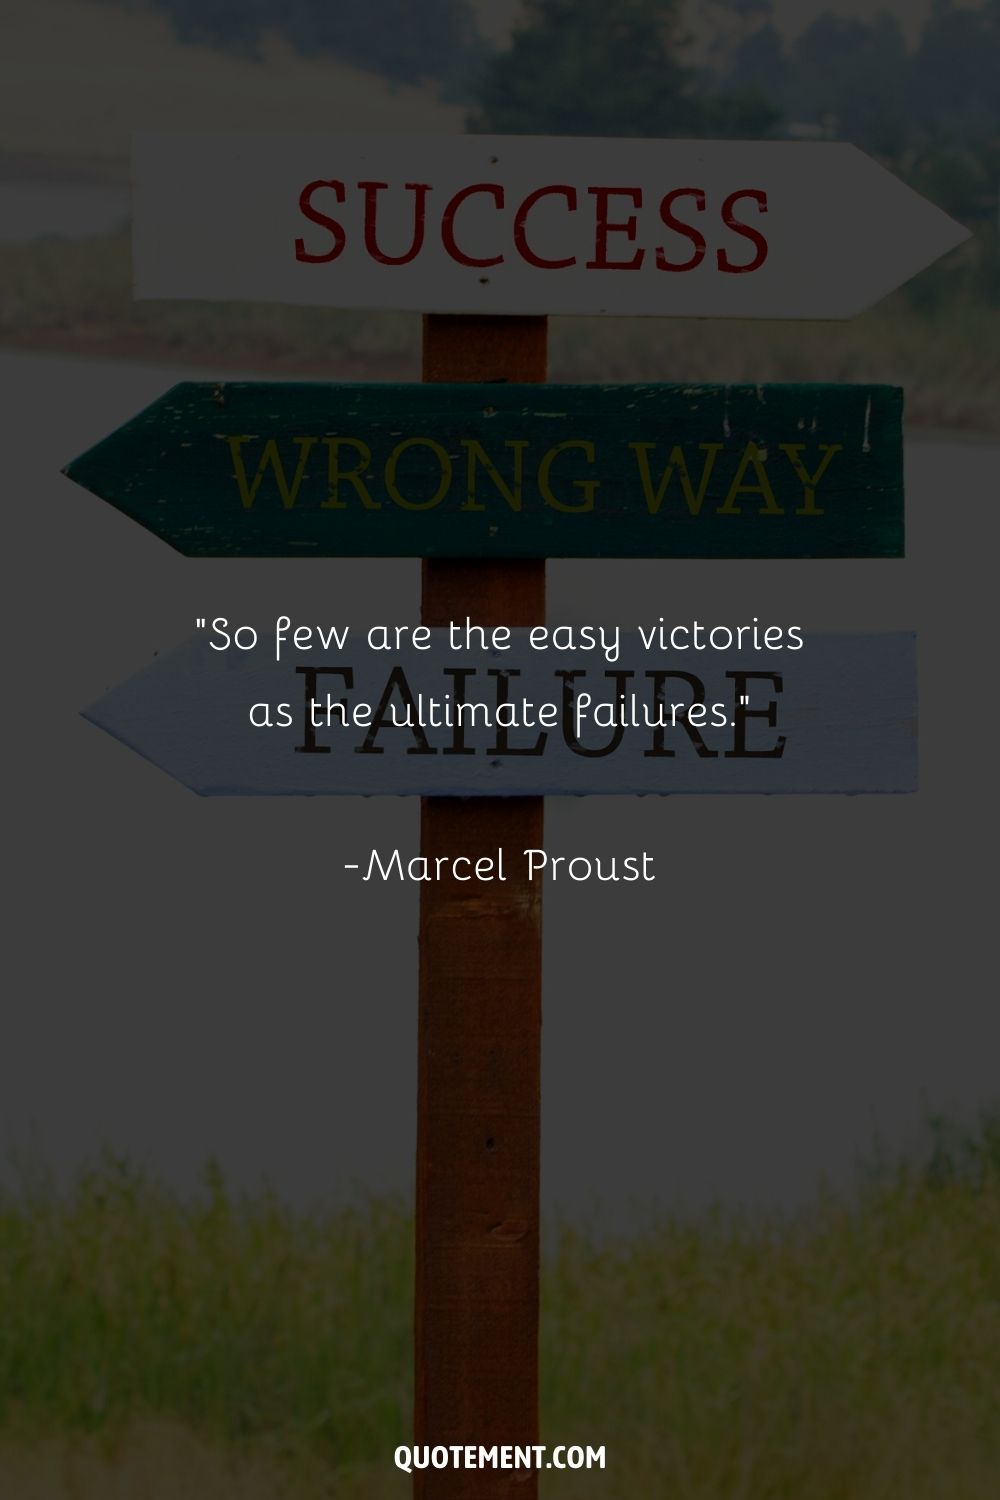 “So few are the easy victories as the ultimate failures.” ― Marcel Proust